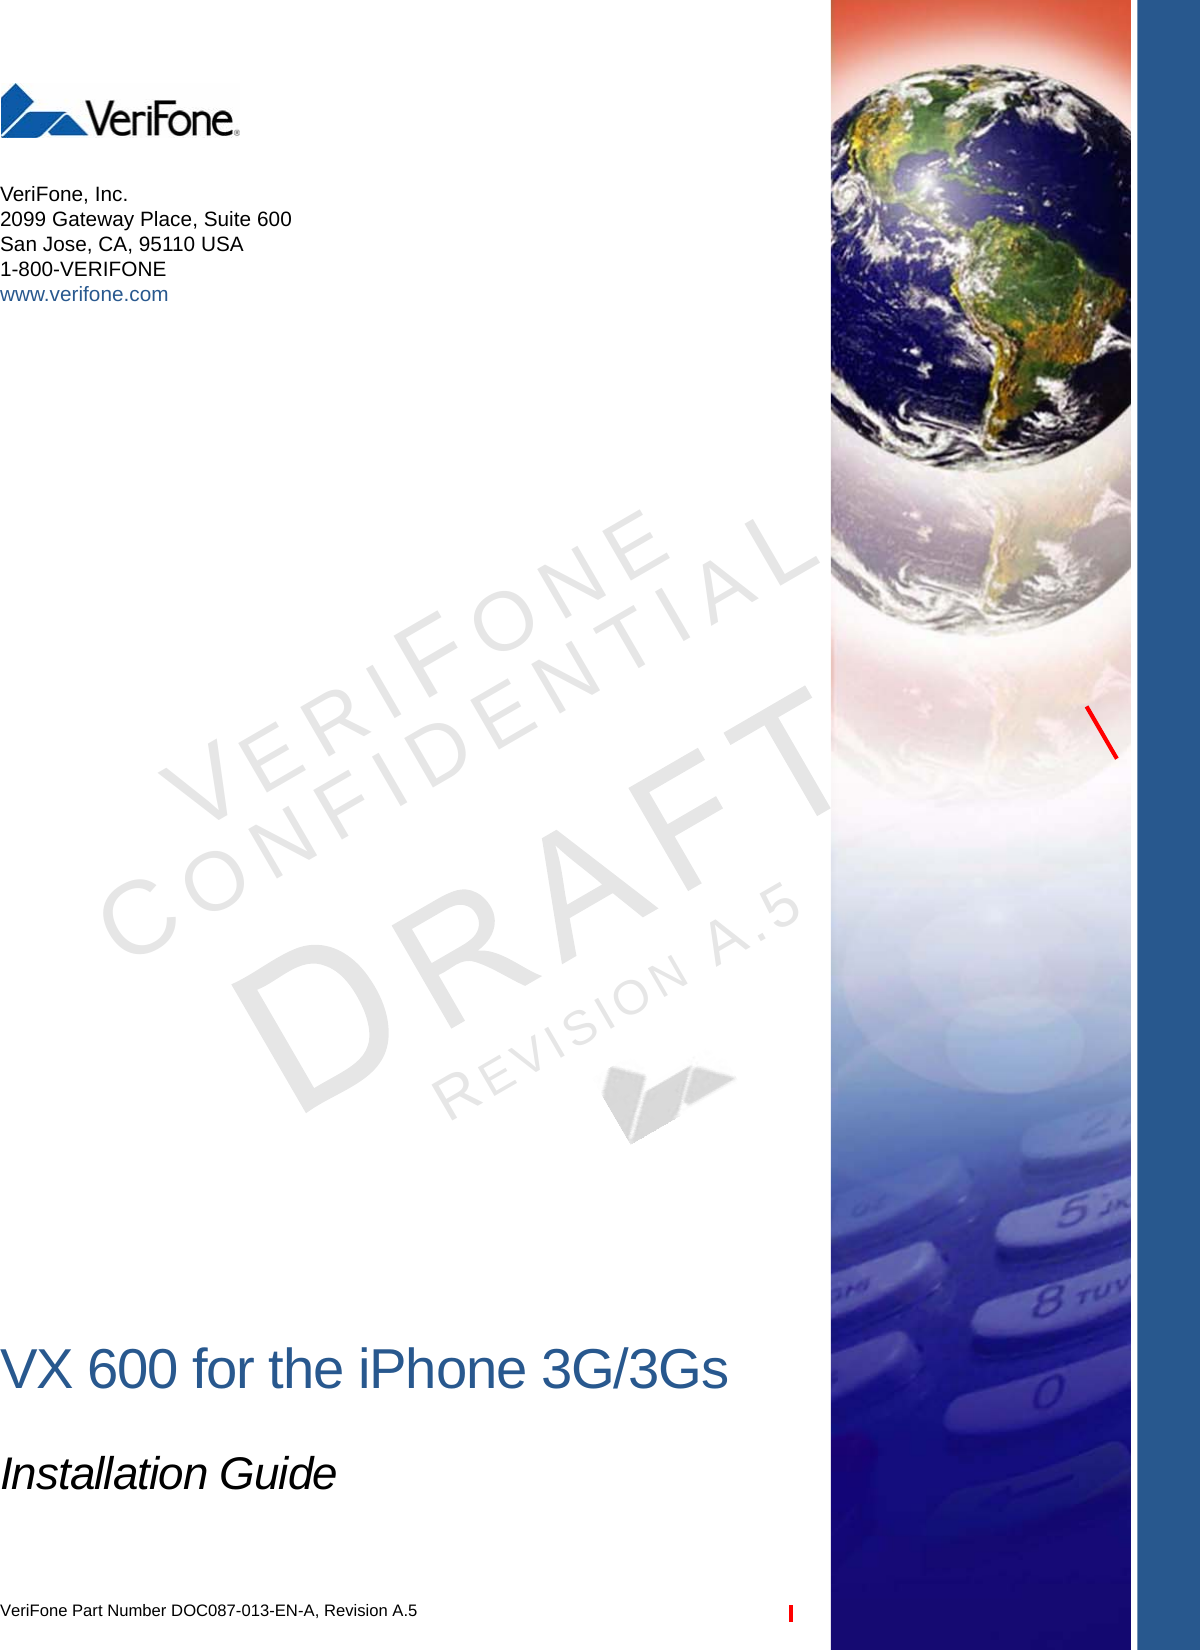 VX 600 for the iPhone 3G/3GsInstallation GuideVeriFone Part Number DOC087-013-EN-A, Revision A.5VeriFone, Inc.2099 Gateway Place, Suite 600San Jose, CA, 95110 USA1-800-VERIFONEwww.verifone.comVERIFONECONFIDENTIALREVISION A.5 